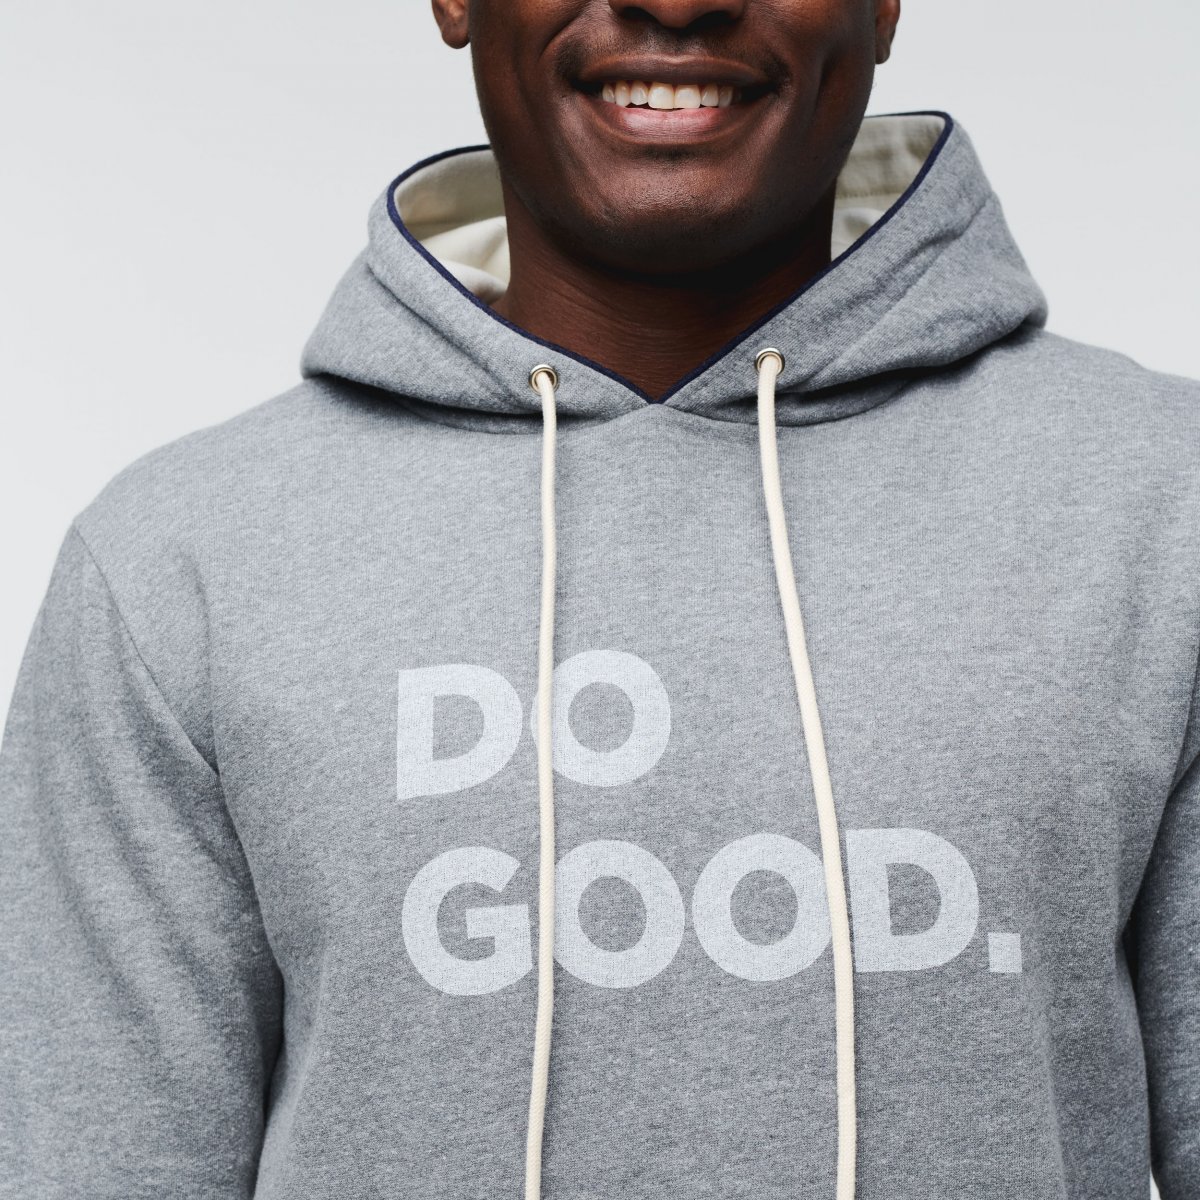 Do Good Pullover Hoodie M